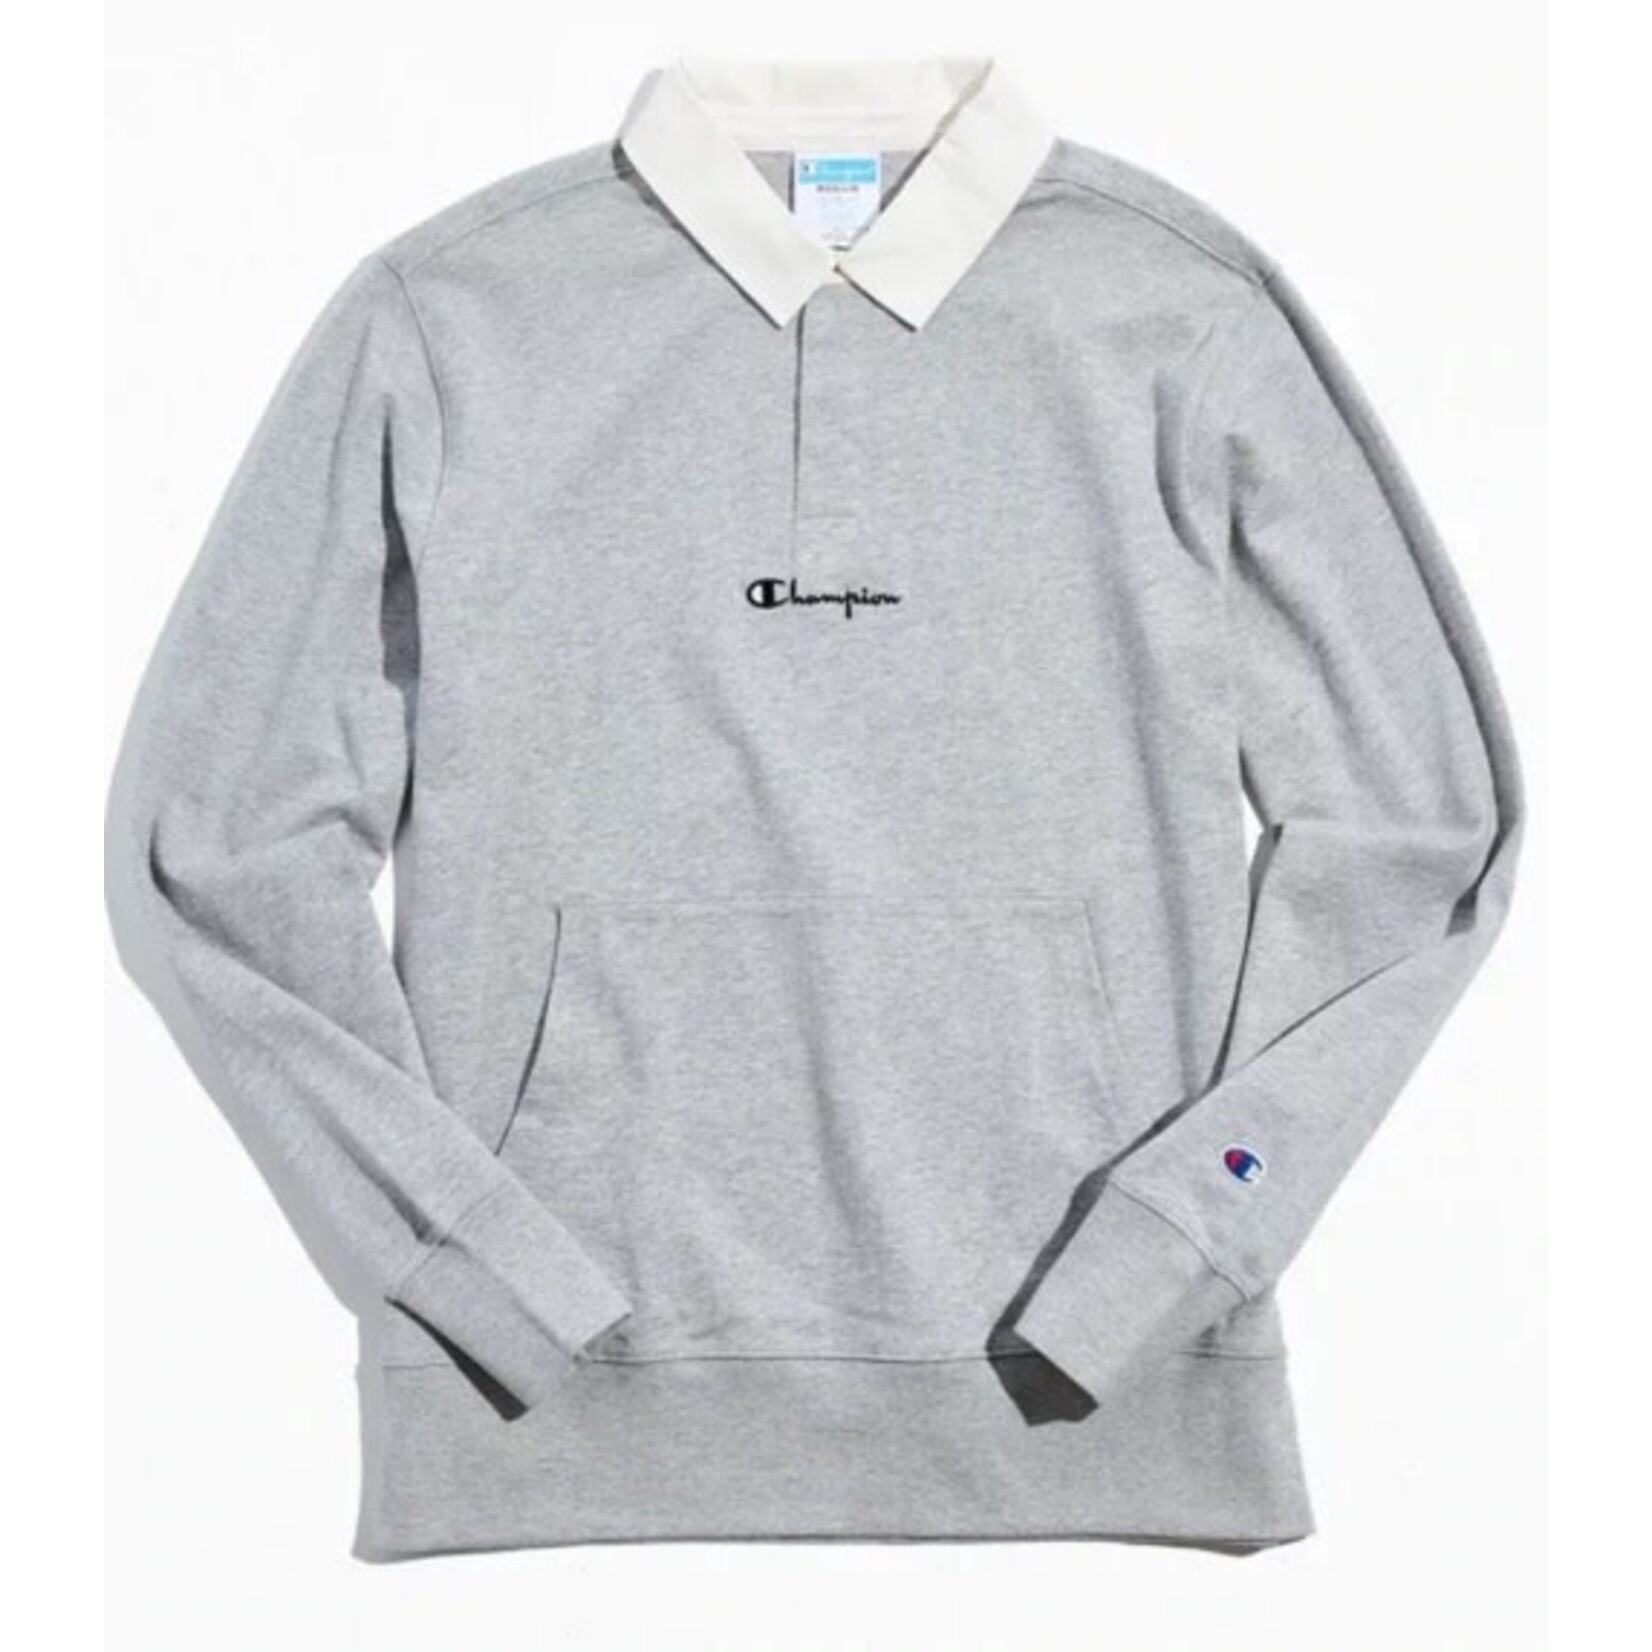 Champion Champion Rugby Collared Shirt